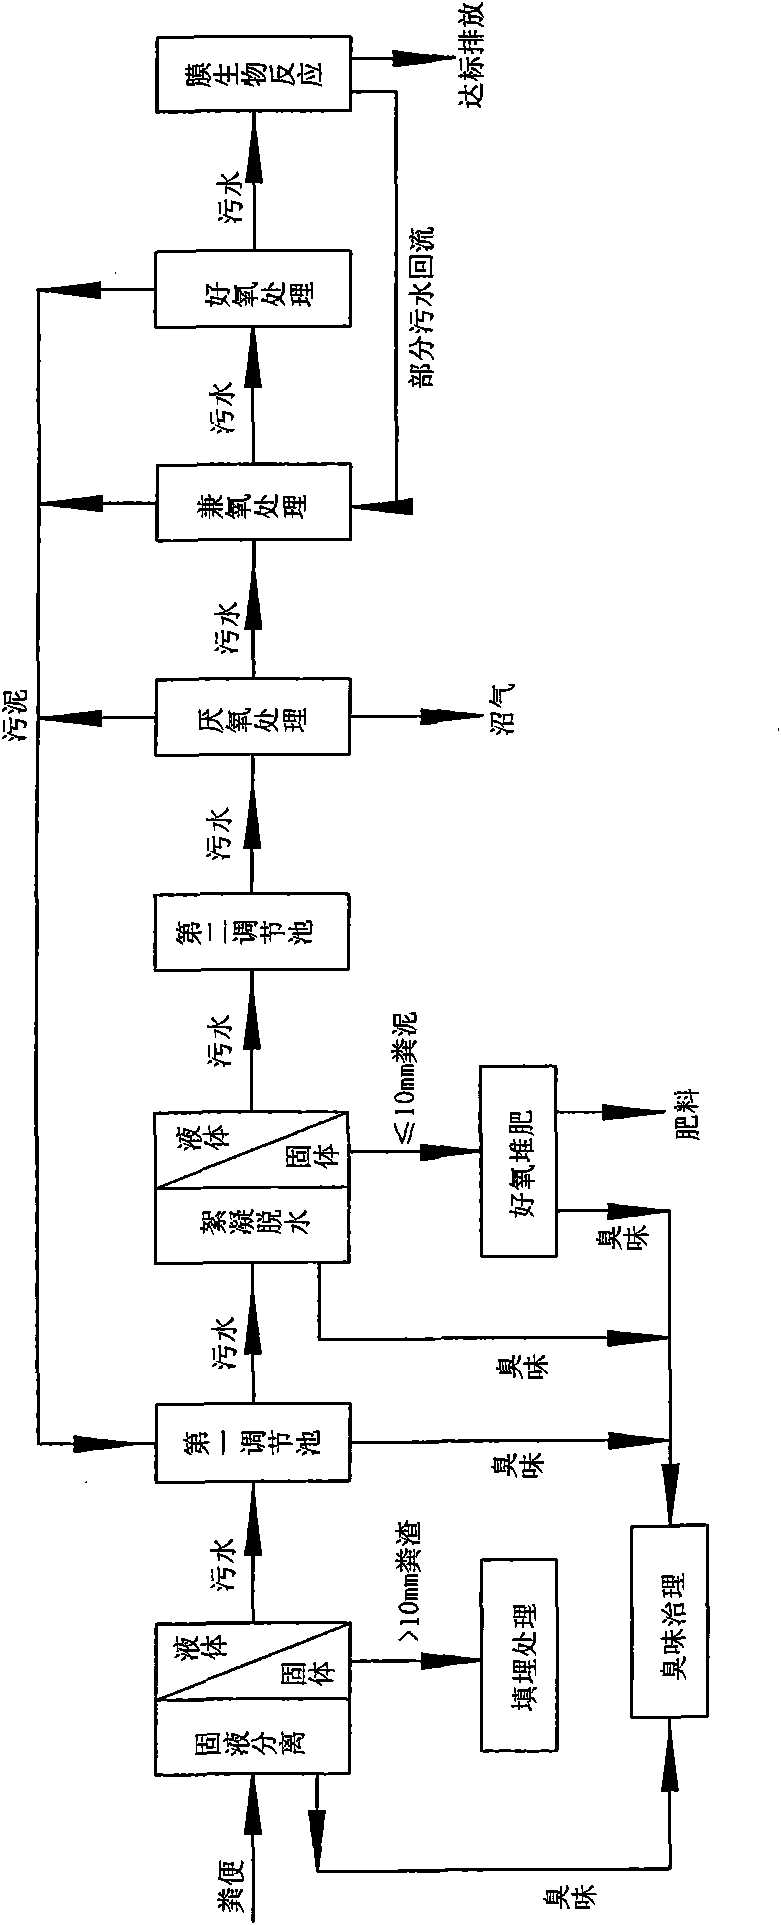 Excrement centralized processing method